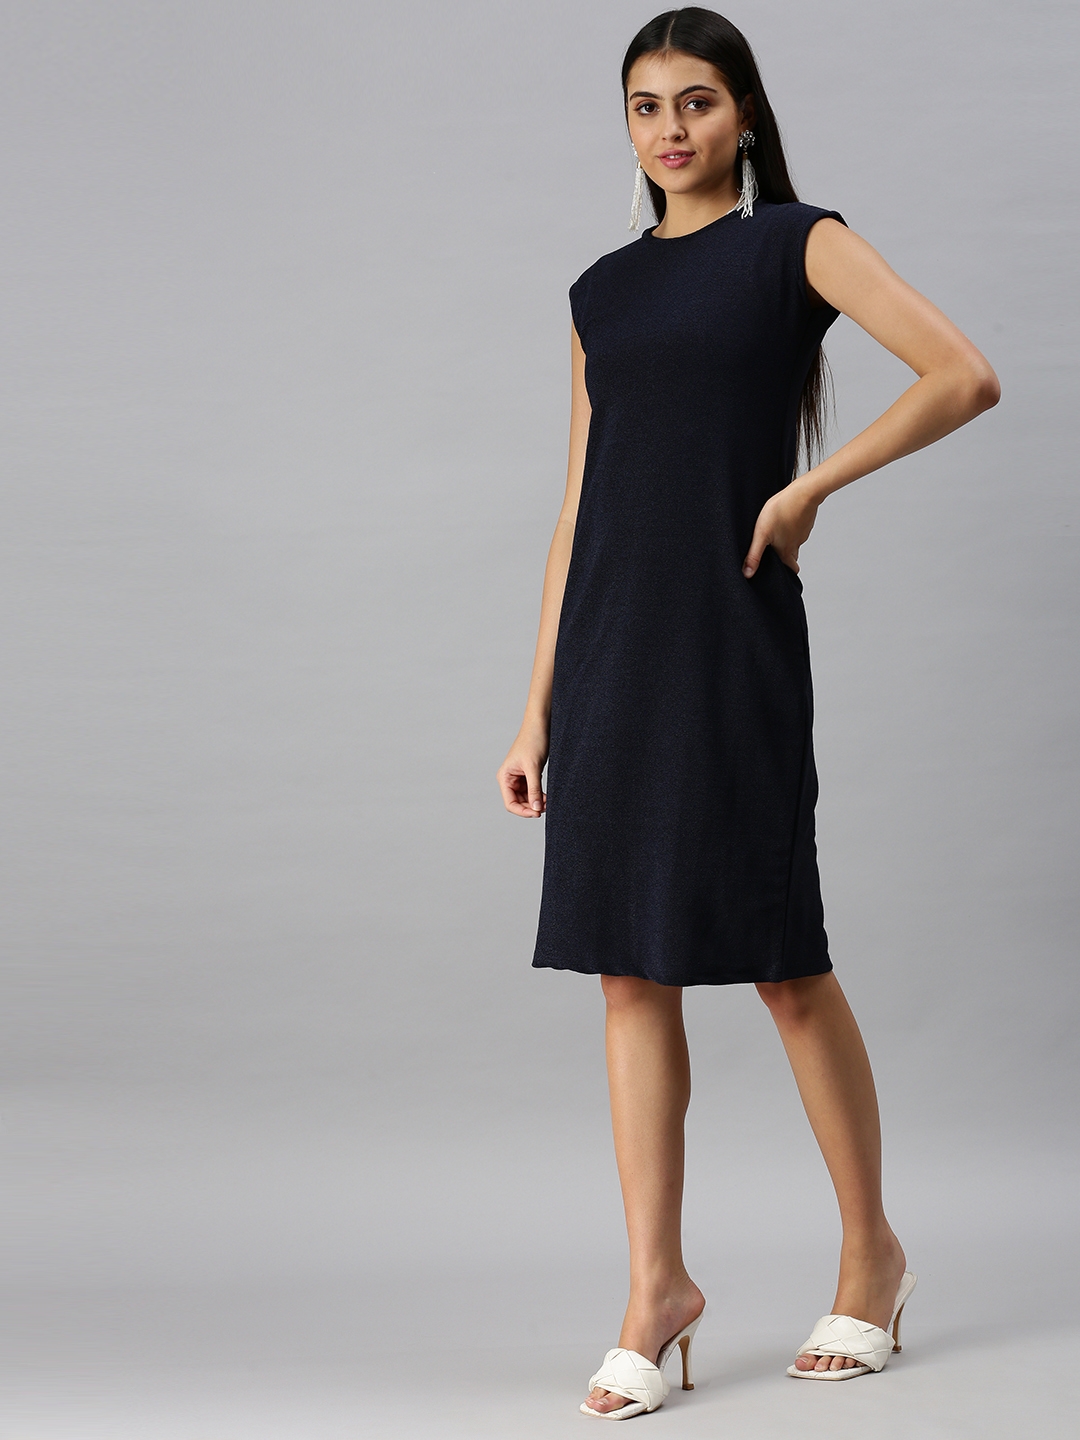 Women's Blue Synthetic Solid Dresses